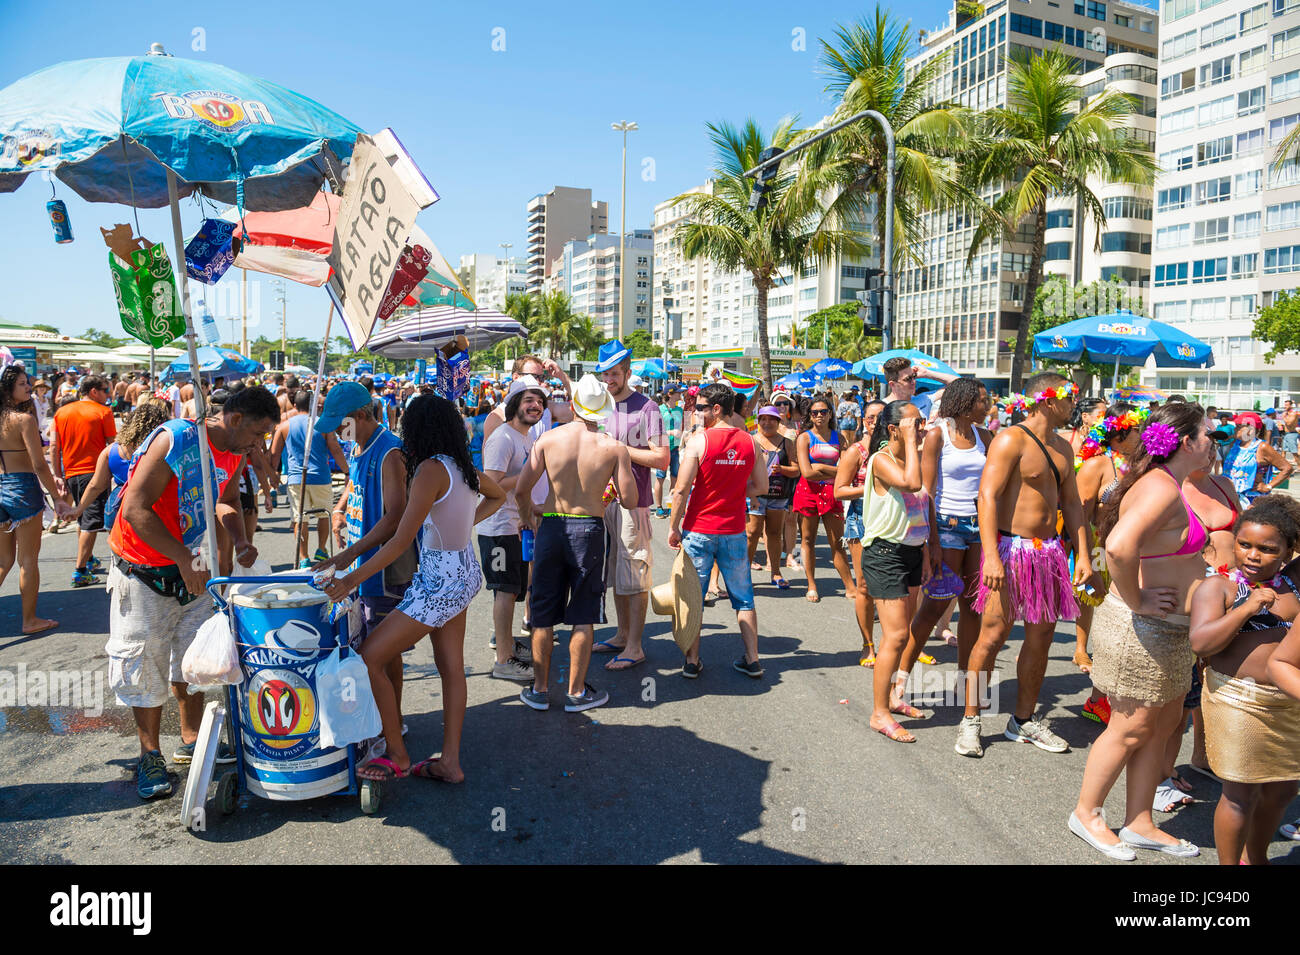 RIO DE JANEIRO - FEBRUARY 19, 2017: Crowds of young people and vendors gather at a morning street party in Copacabana during the city's carnival celeb Stock Photo